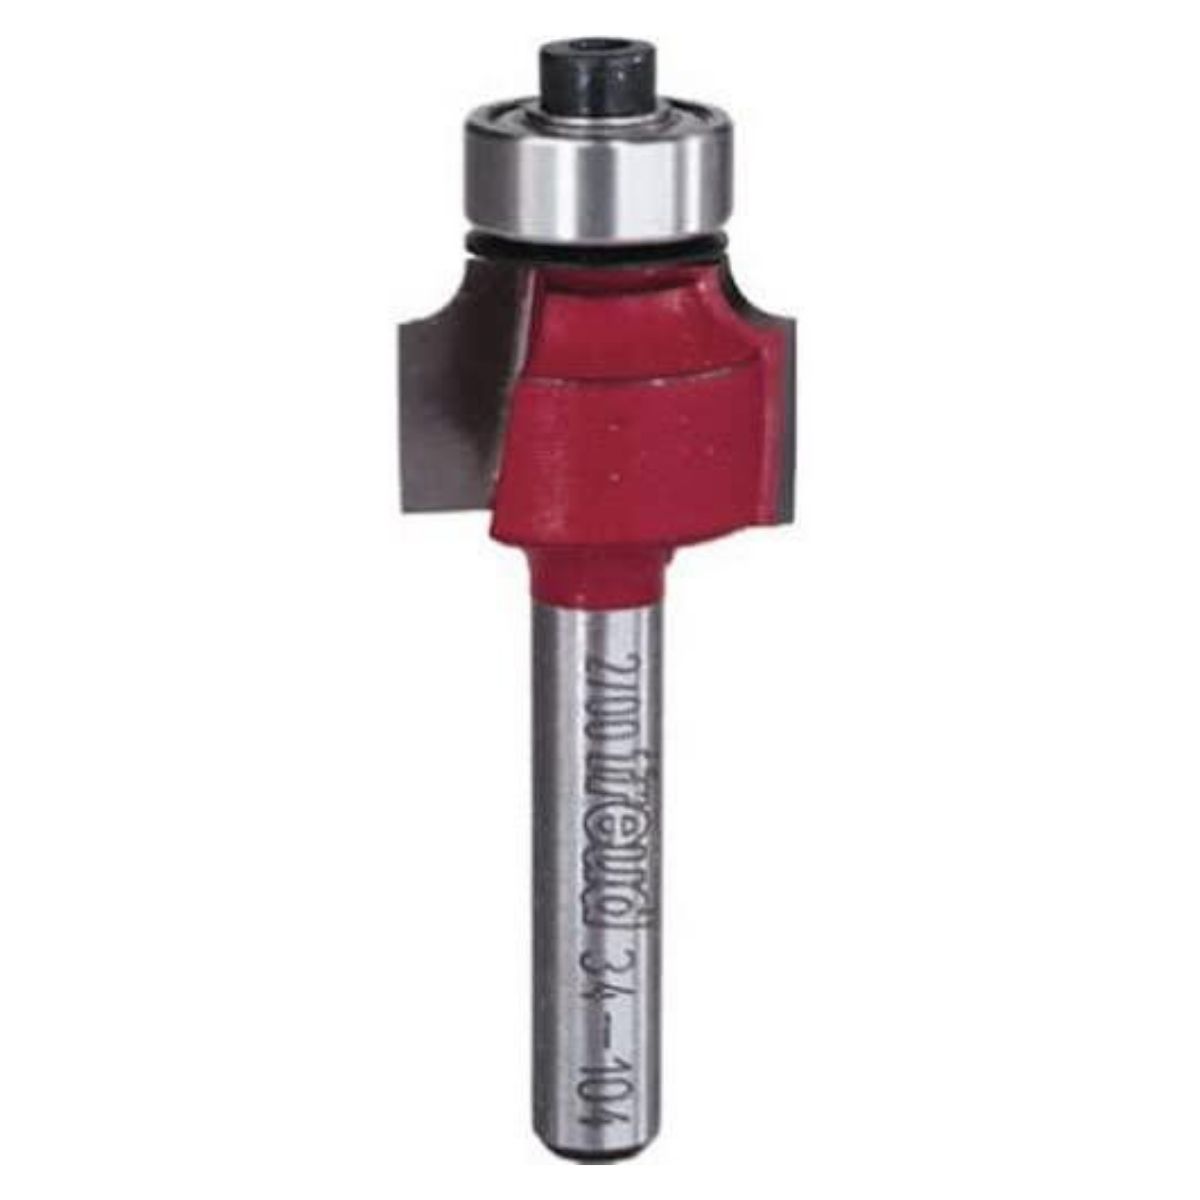 The Router Bit Types Option: Rounding-Over